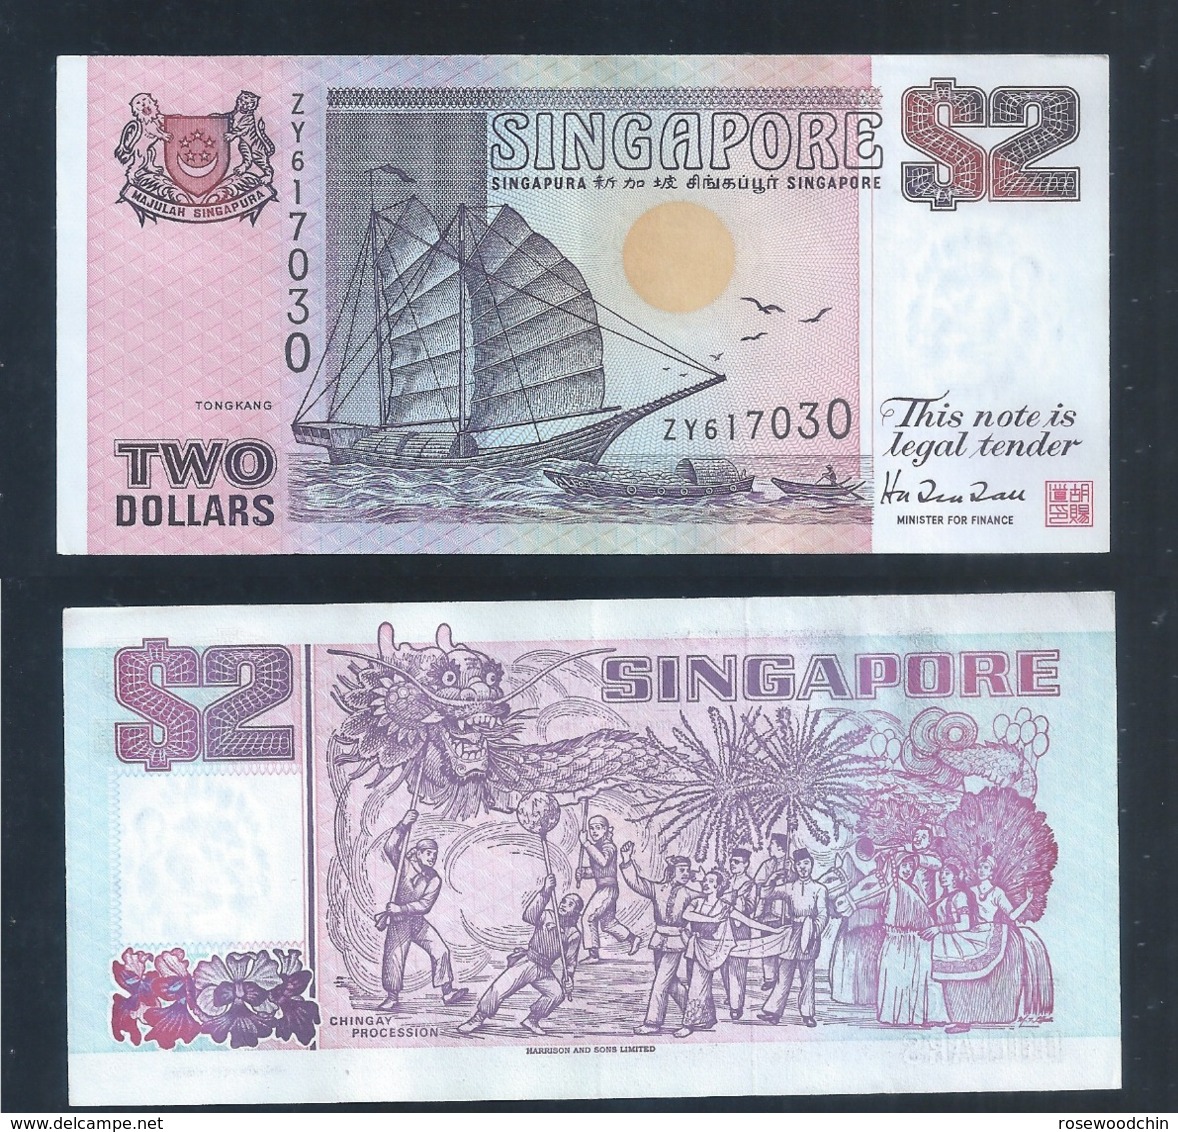 1 Pc. Of Singapore $2 Tong Kang / Ship Series Currency Paper Money Banknote (#137A) AU - Singapore